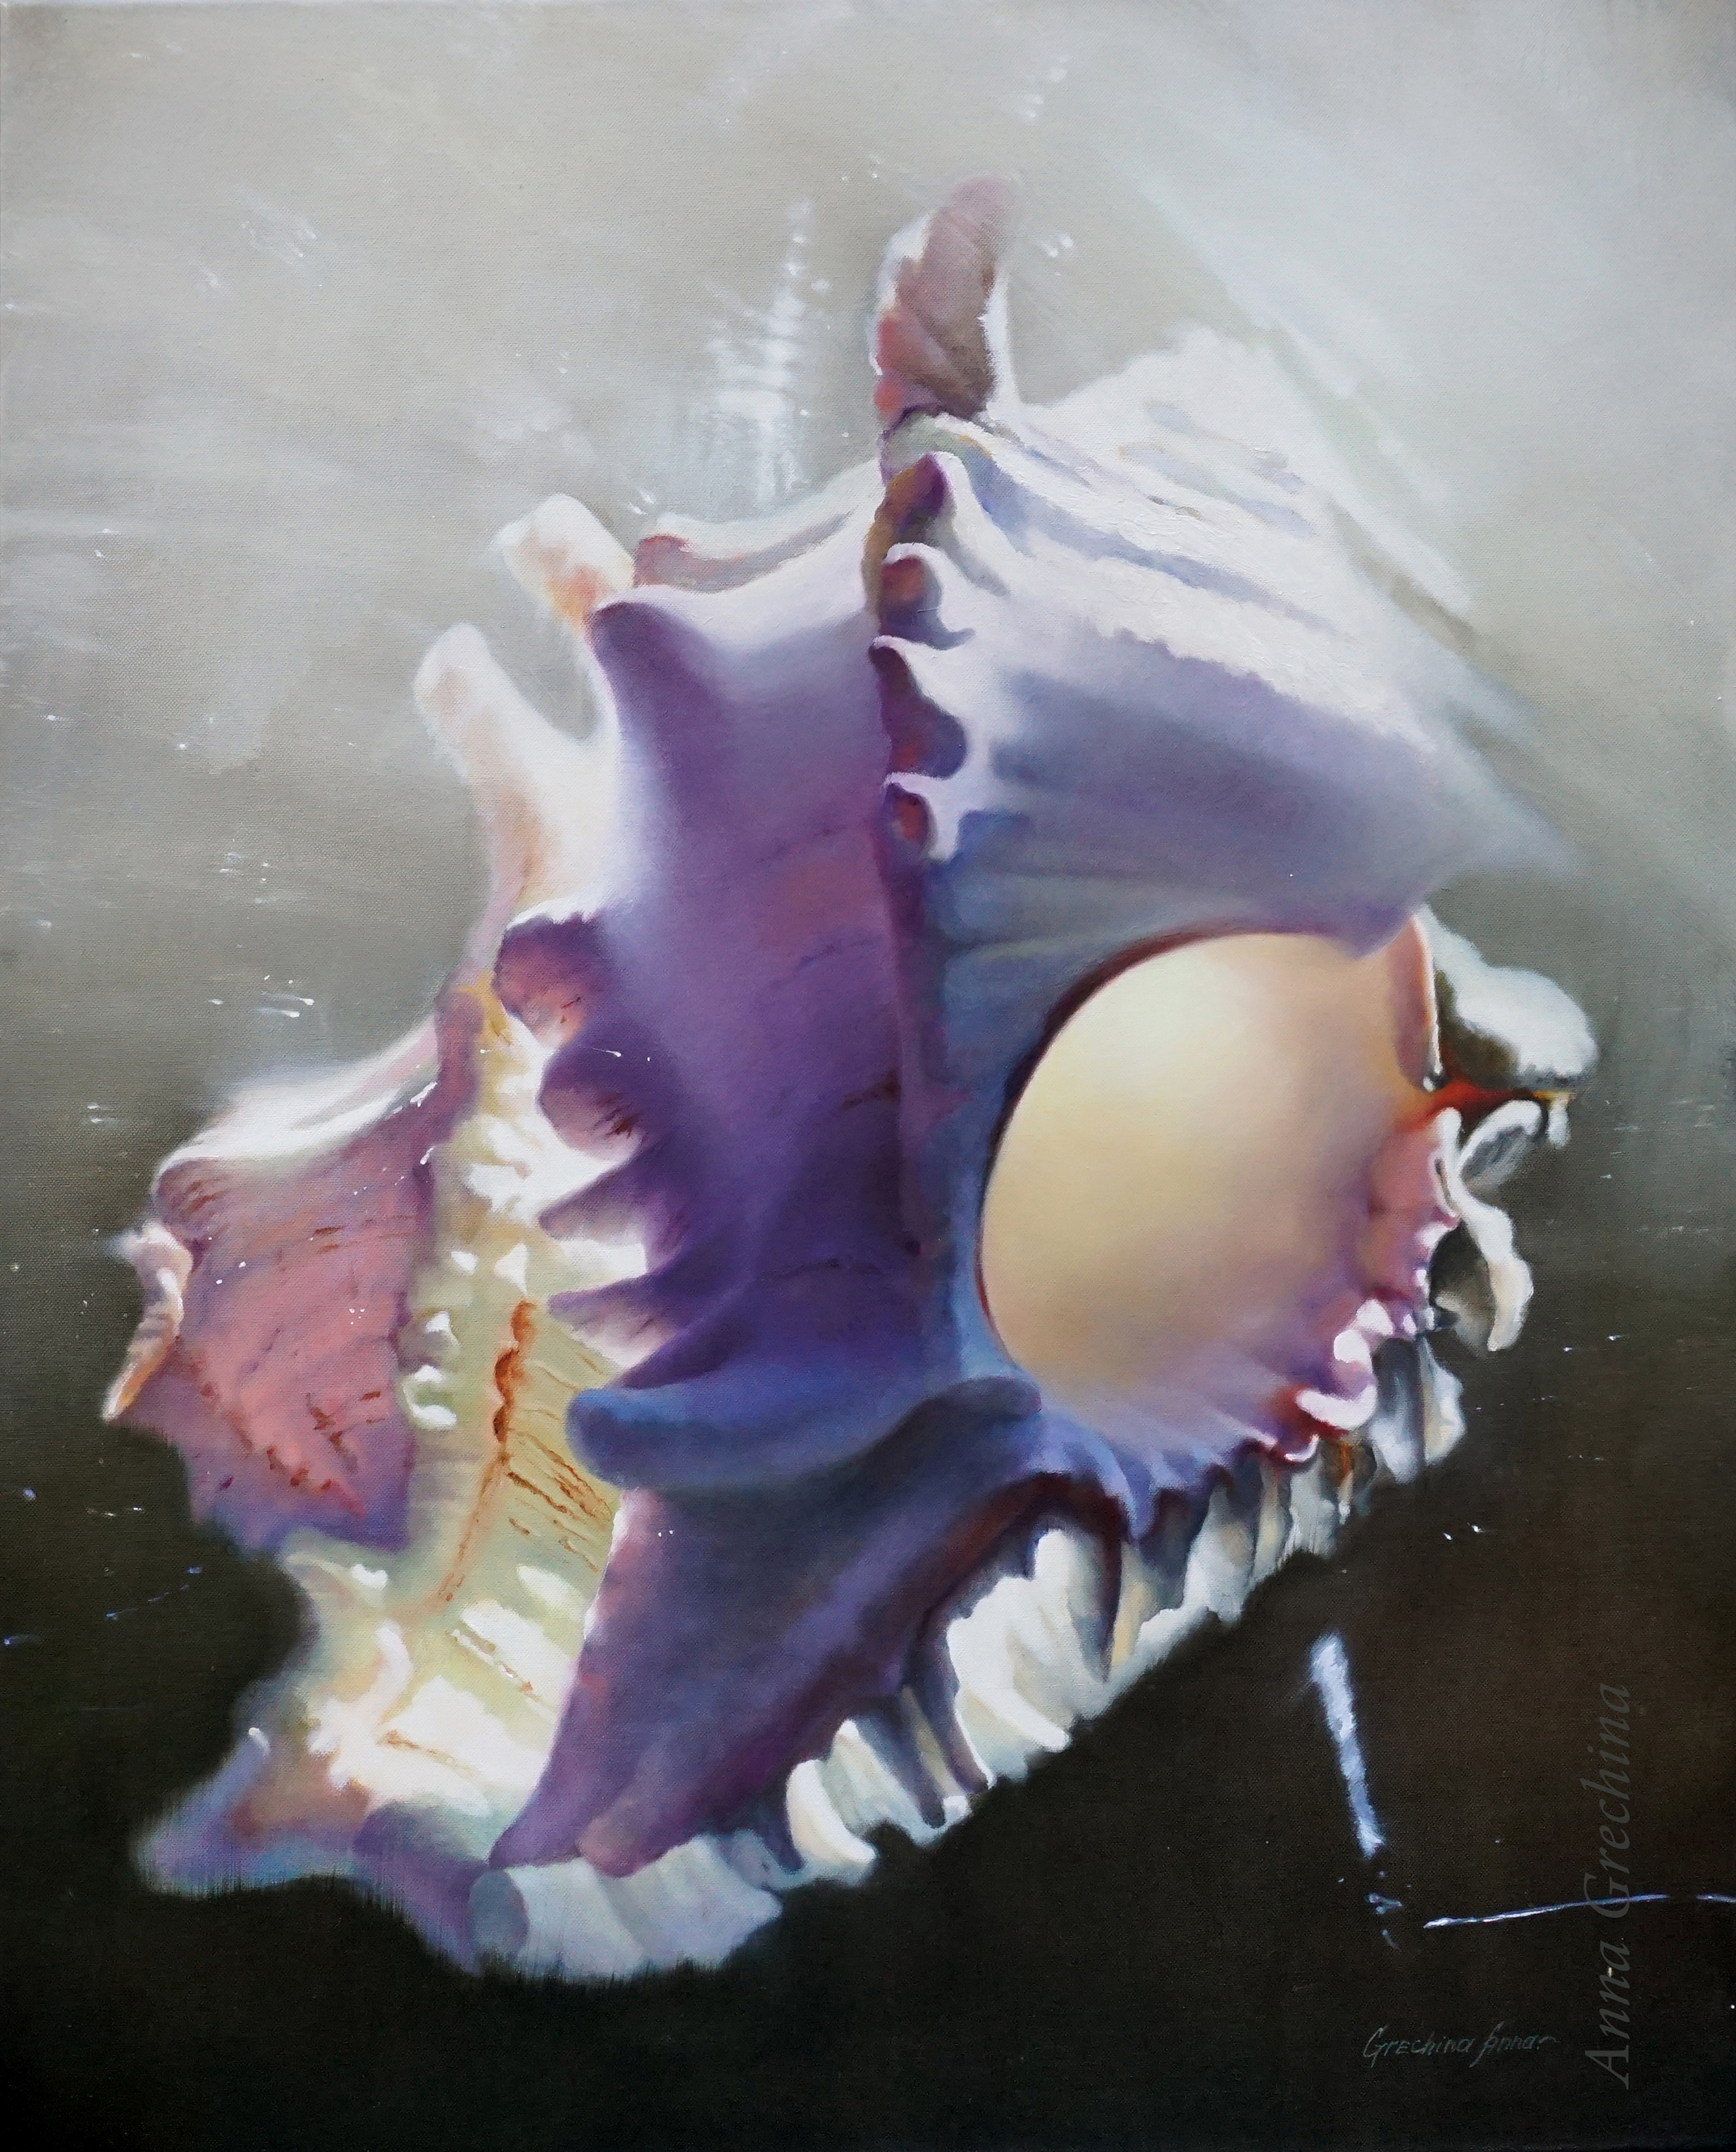 Grechina Anna painting.  "Breathing". Still life with a seashell.